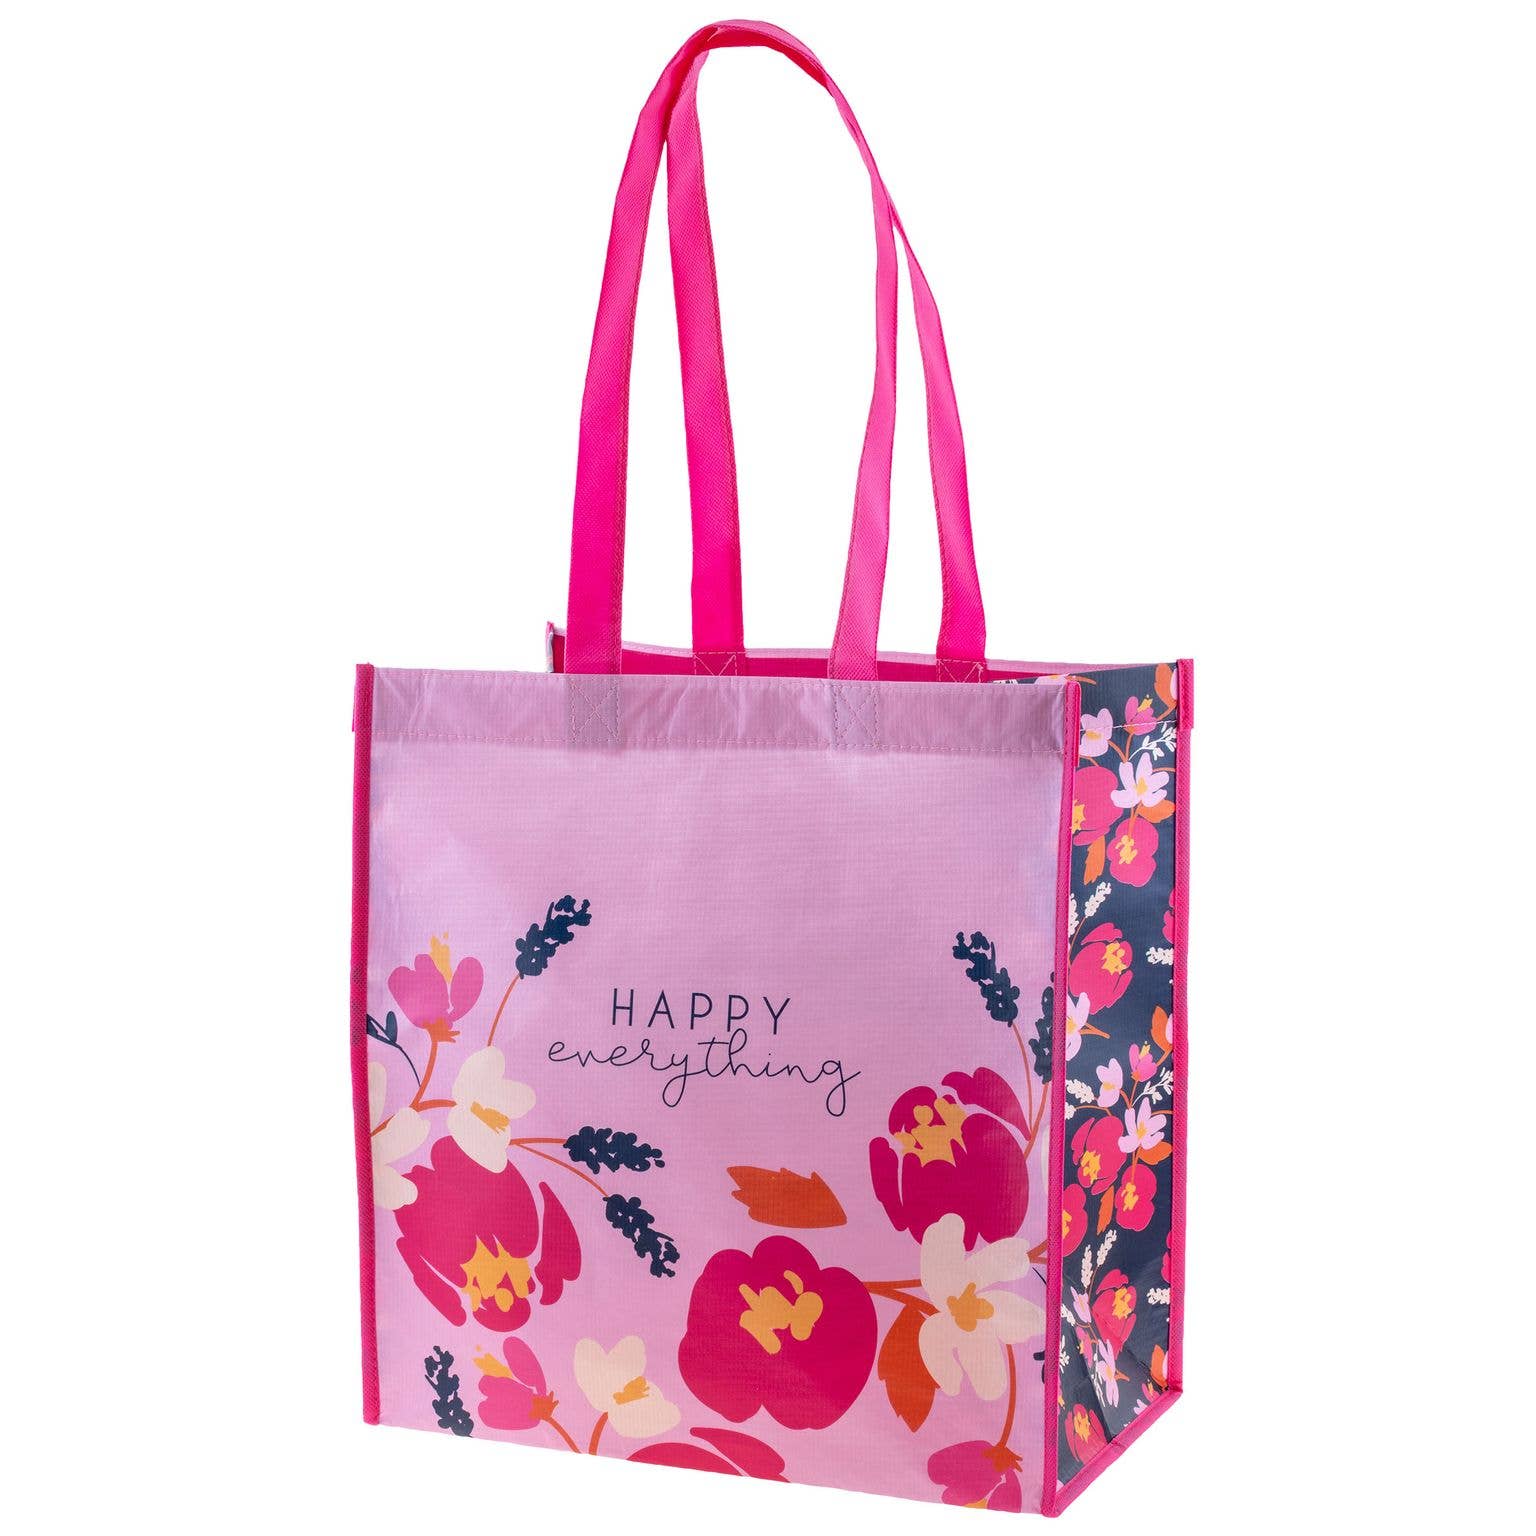 Recycled Large Gift Bag - Happy Everything